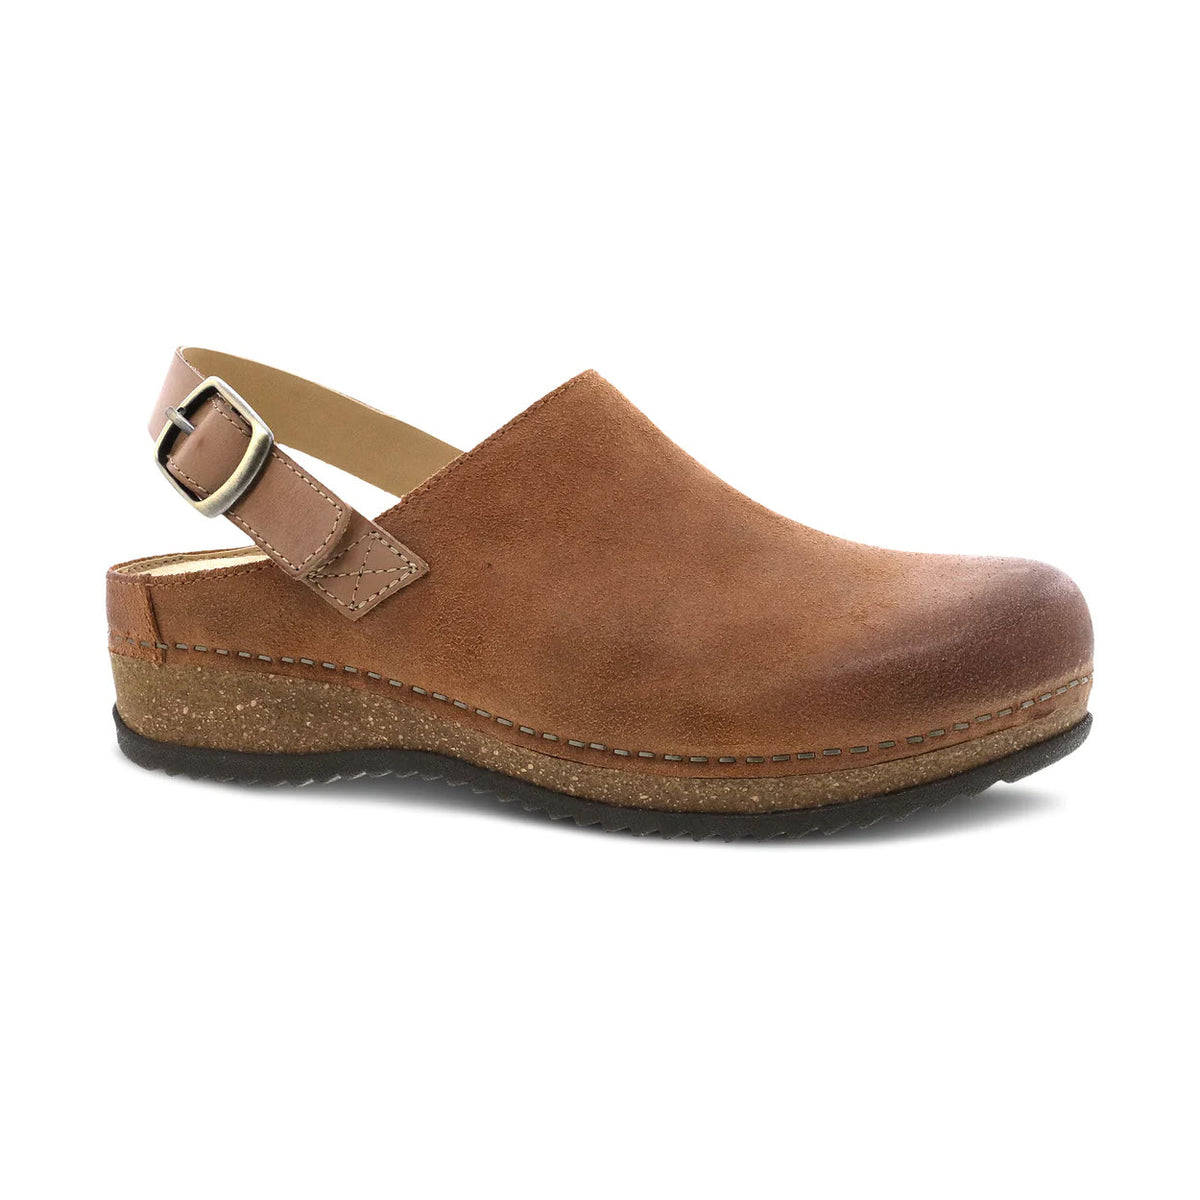 A single Dansko Merrin Tan women&#39;s clog with a heel strap and sustainable cork base, isolated on a white background.